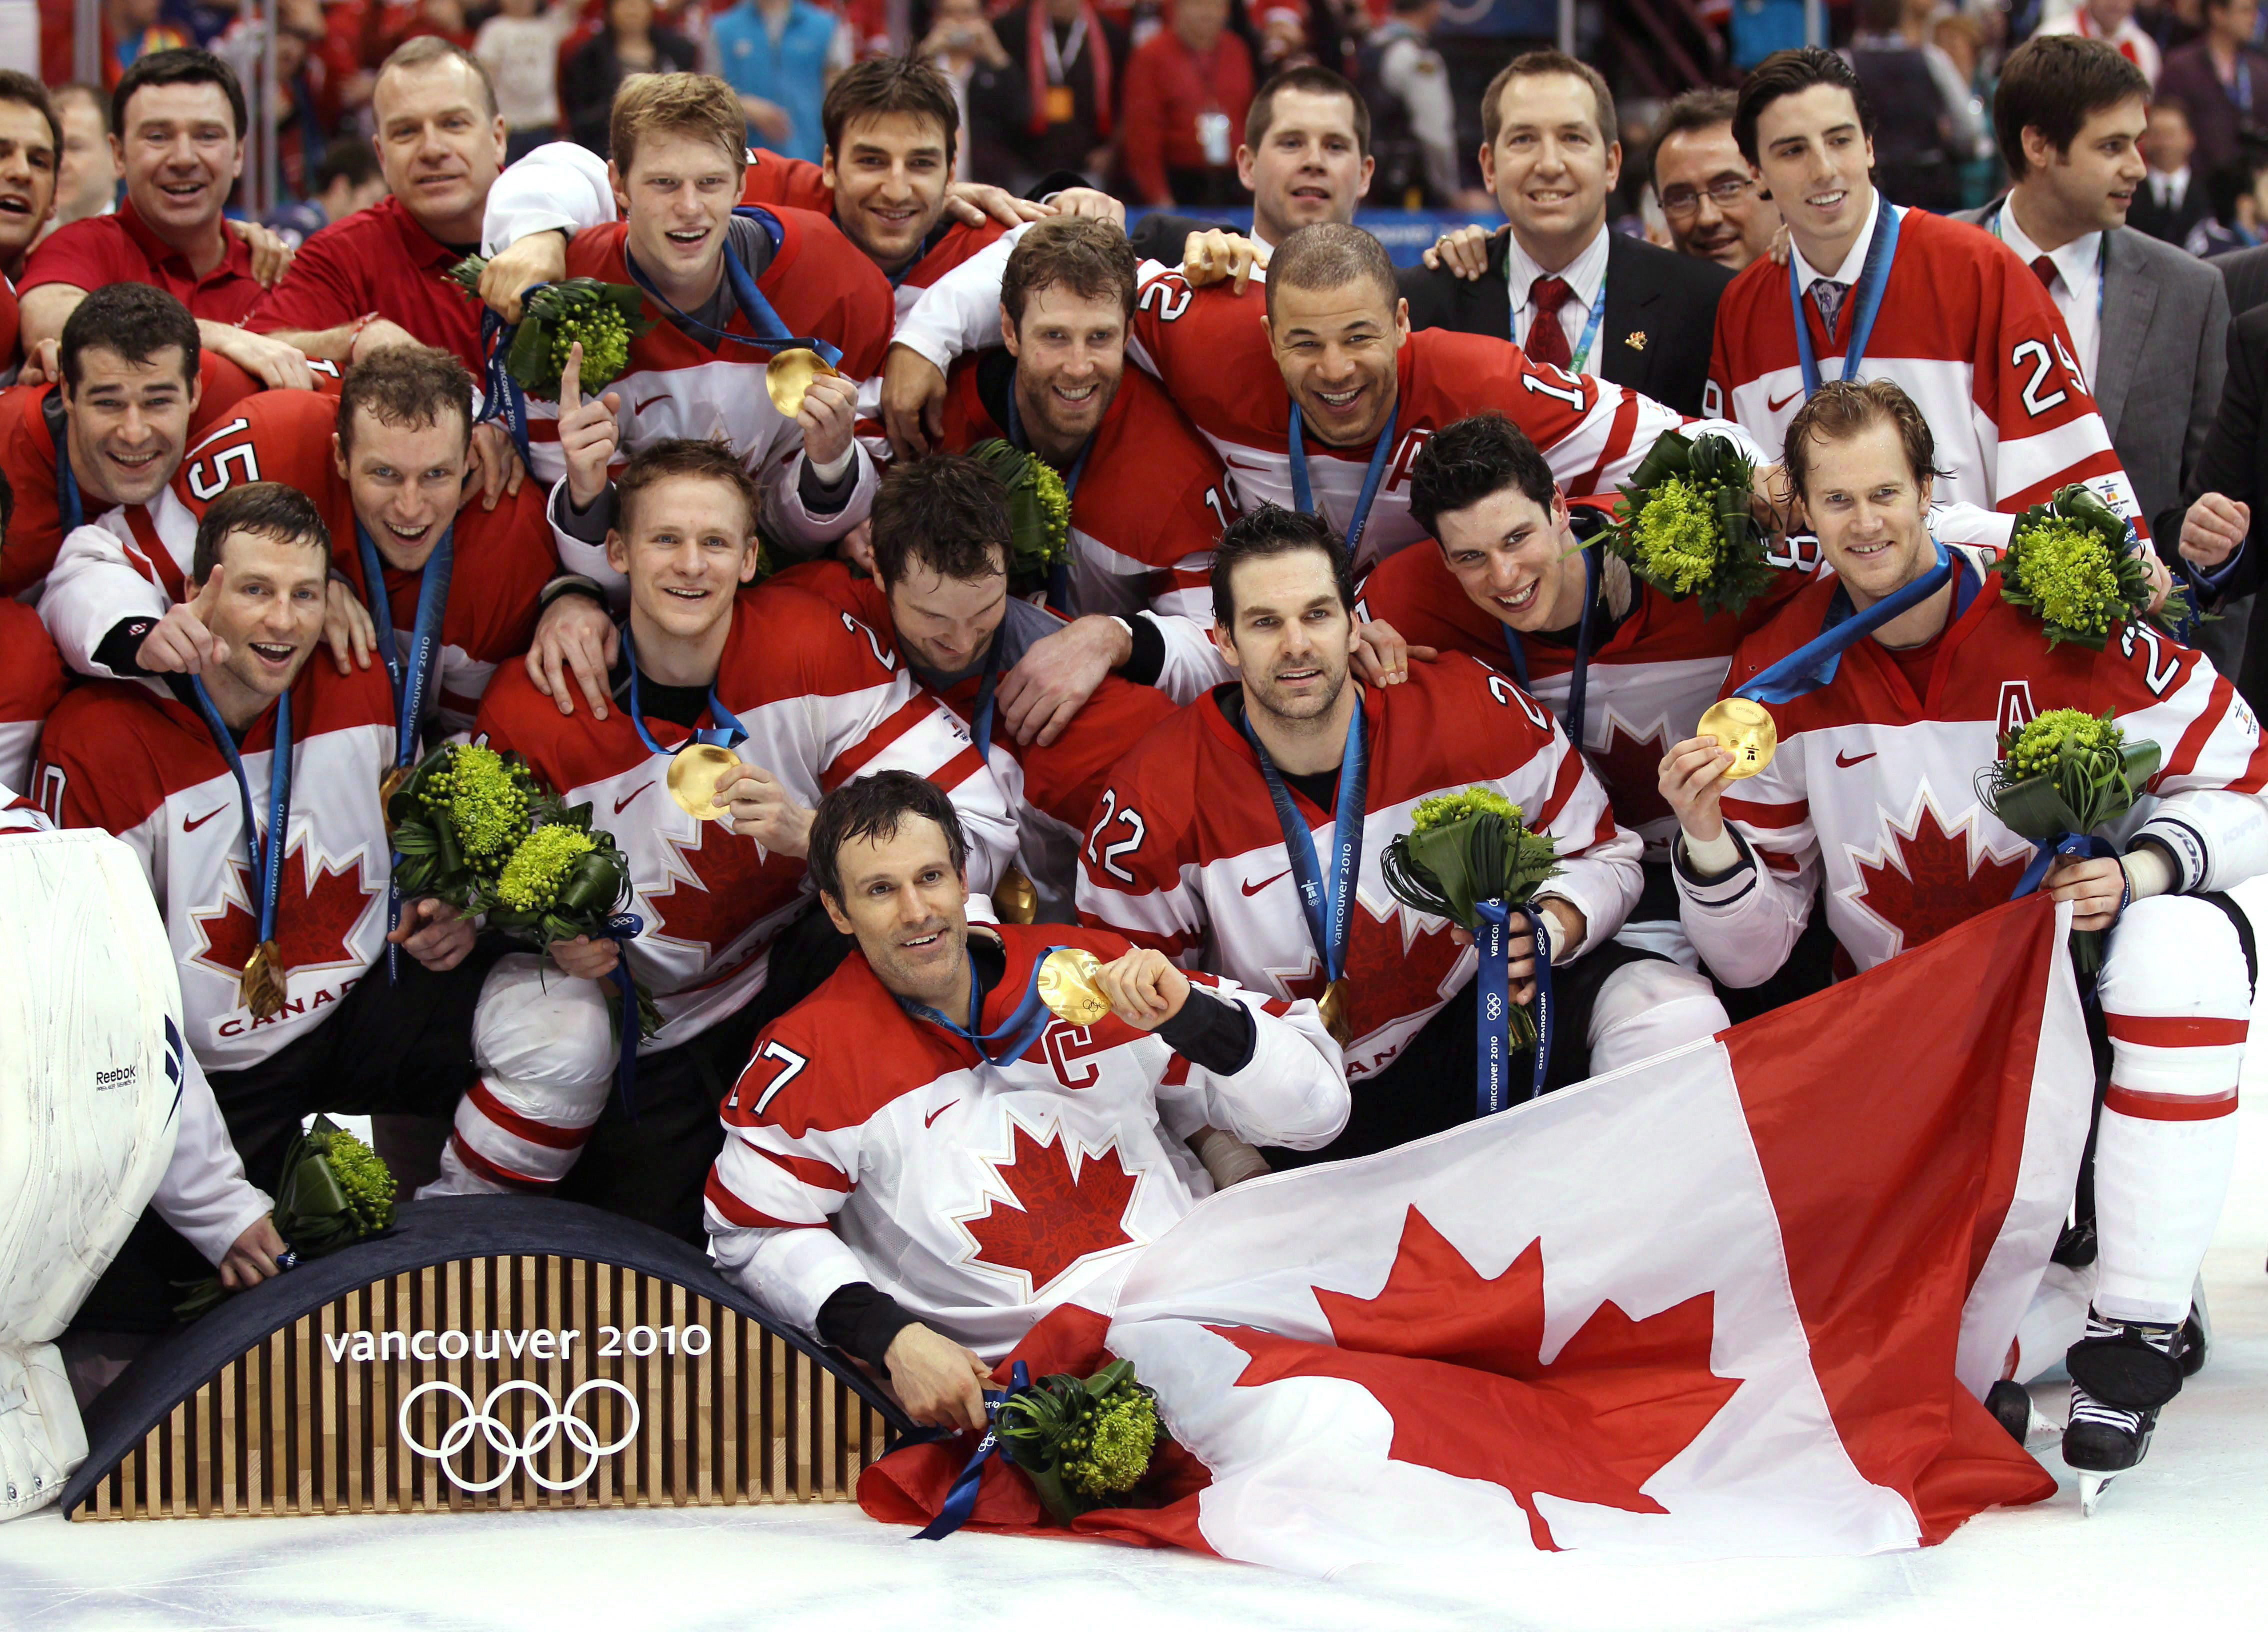 Team Canada poses for a photo after winning the gold medal game against the USA in the men's ice hockey gold medal final at the 2010 Winter Olympic Games in Vancouver, Sunday, Feb. 28, 2010. The Canadians have been on a remarkable tear in the nearly seven years since, winners now of 16 straight games and three straight best-on-best tournaments, including two Olympic gold medals and the 2016 World Cup. THE CANADIAN PRESS/Jonathan Hayward